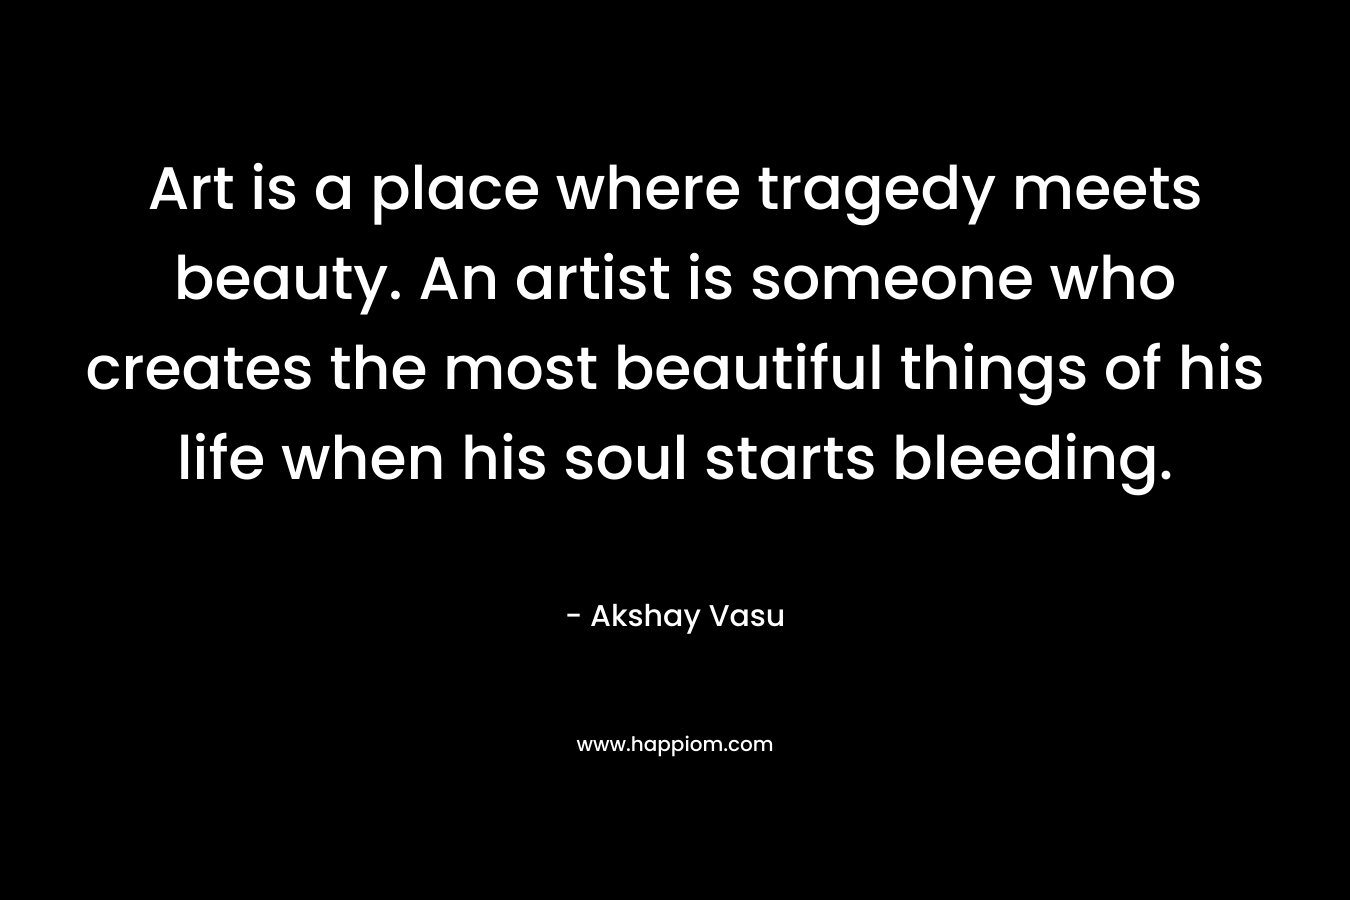 Art is a place where tragedy meets beauty. An artist is someone who creates the most beautiful things of his life when his soul starts bleeding.